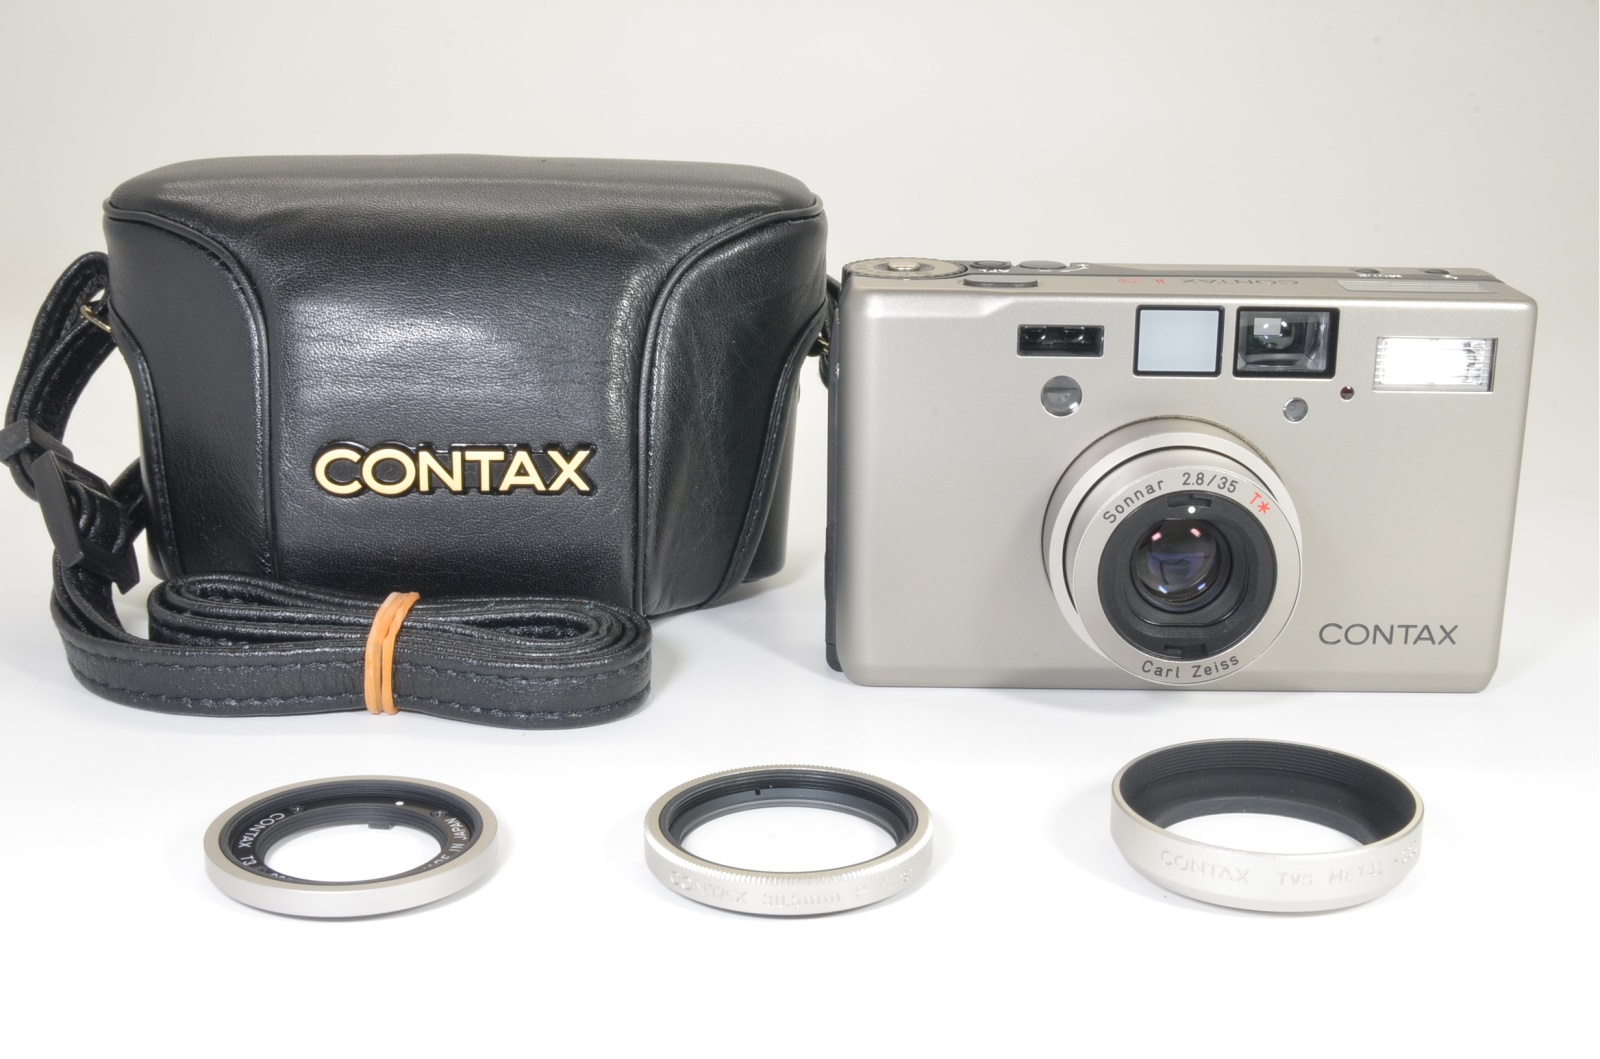 contax t3 titanium silver data back double teeth shooting tested